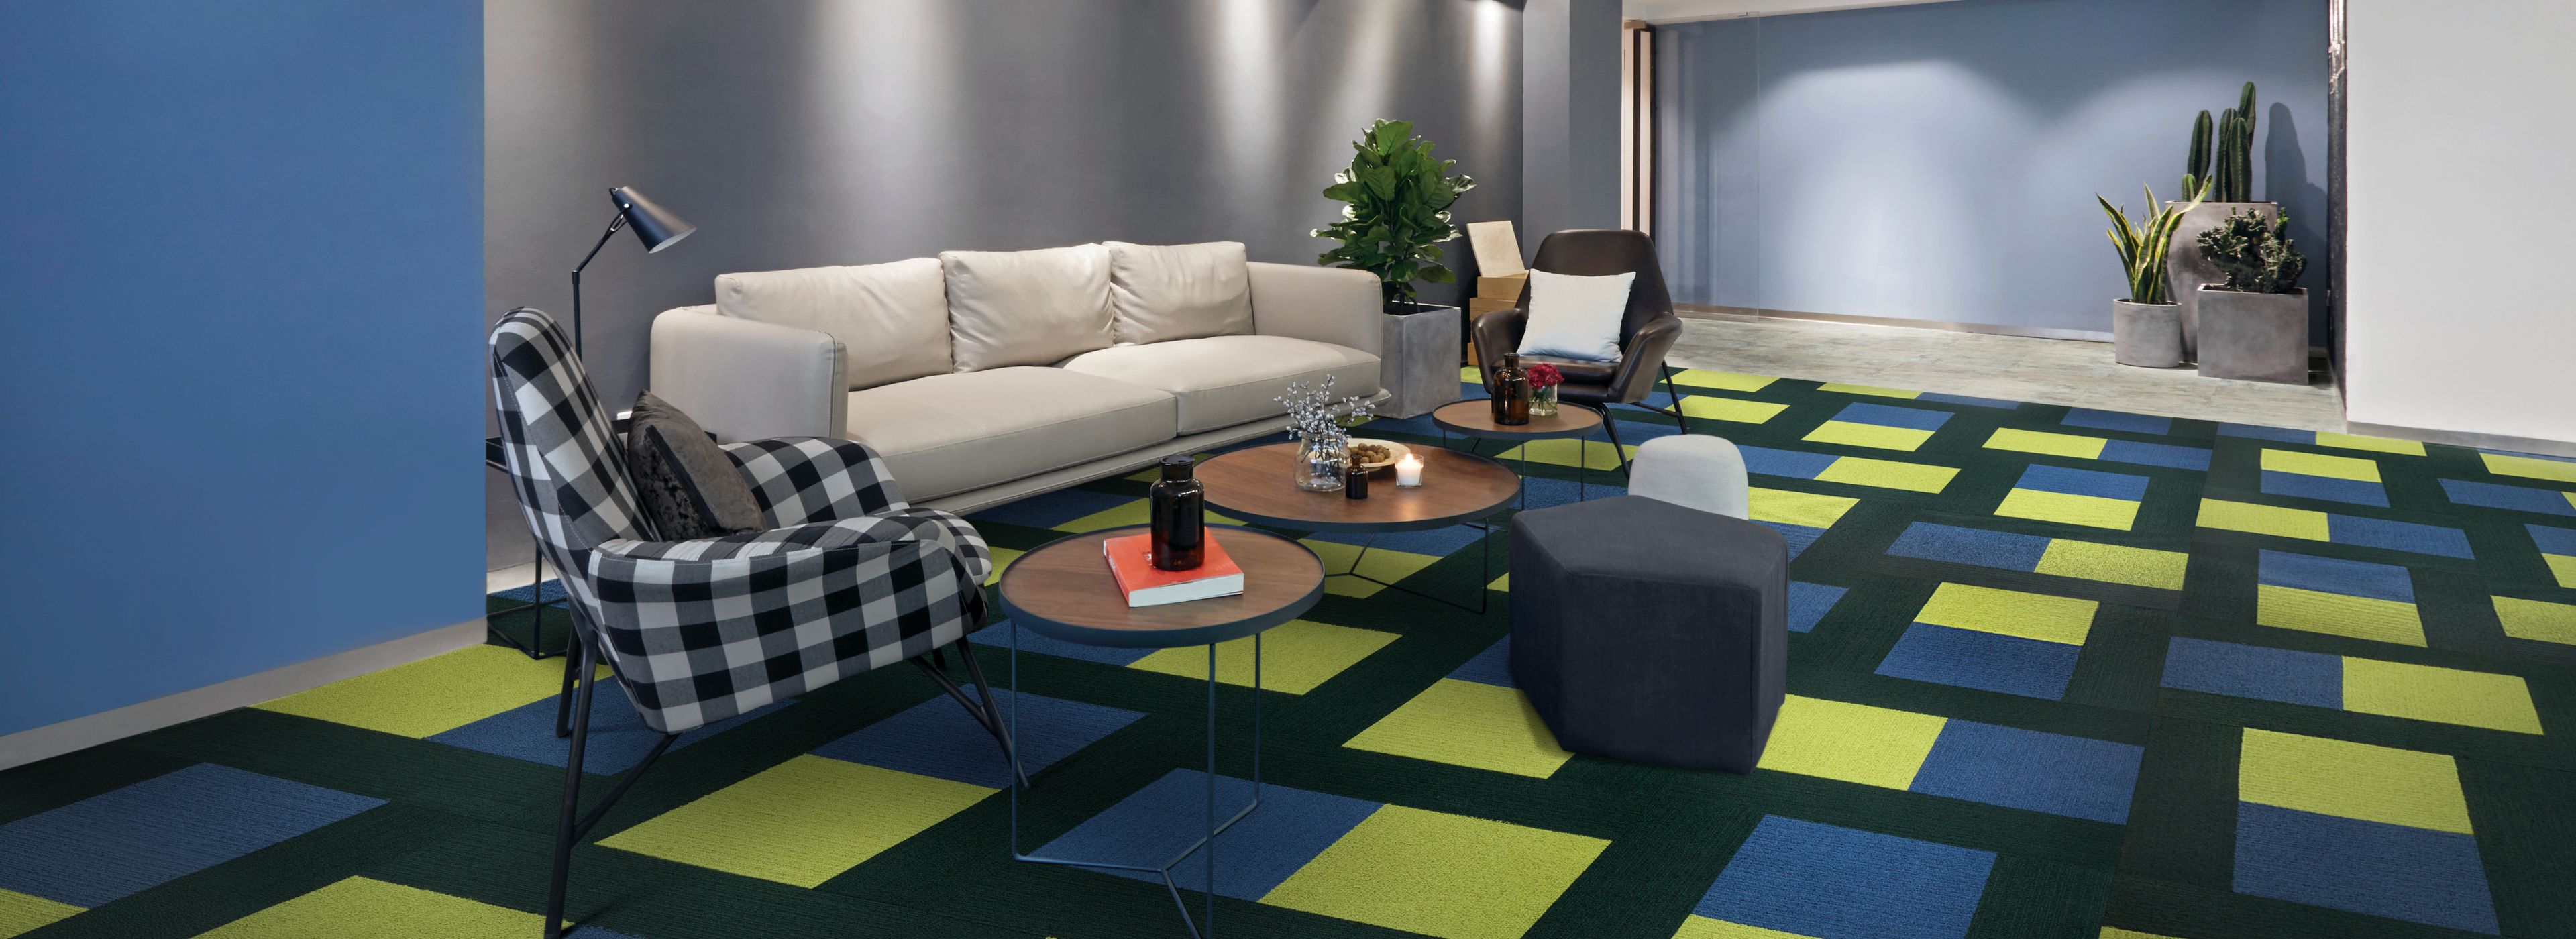 Interface Viva Colores carpet tile and Textured Stones LVT in seating area with couch  image number 1